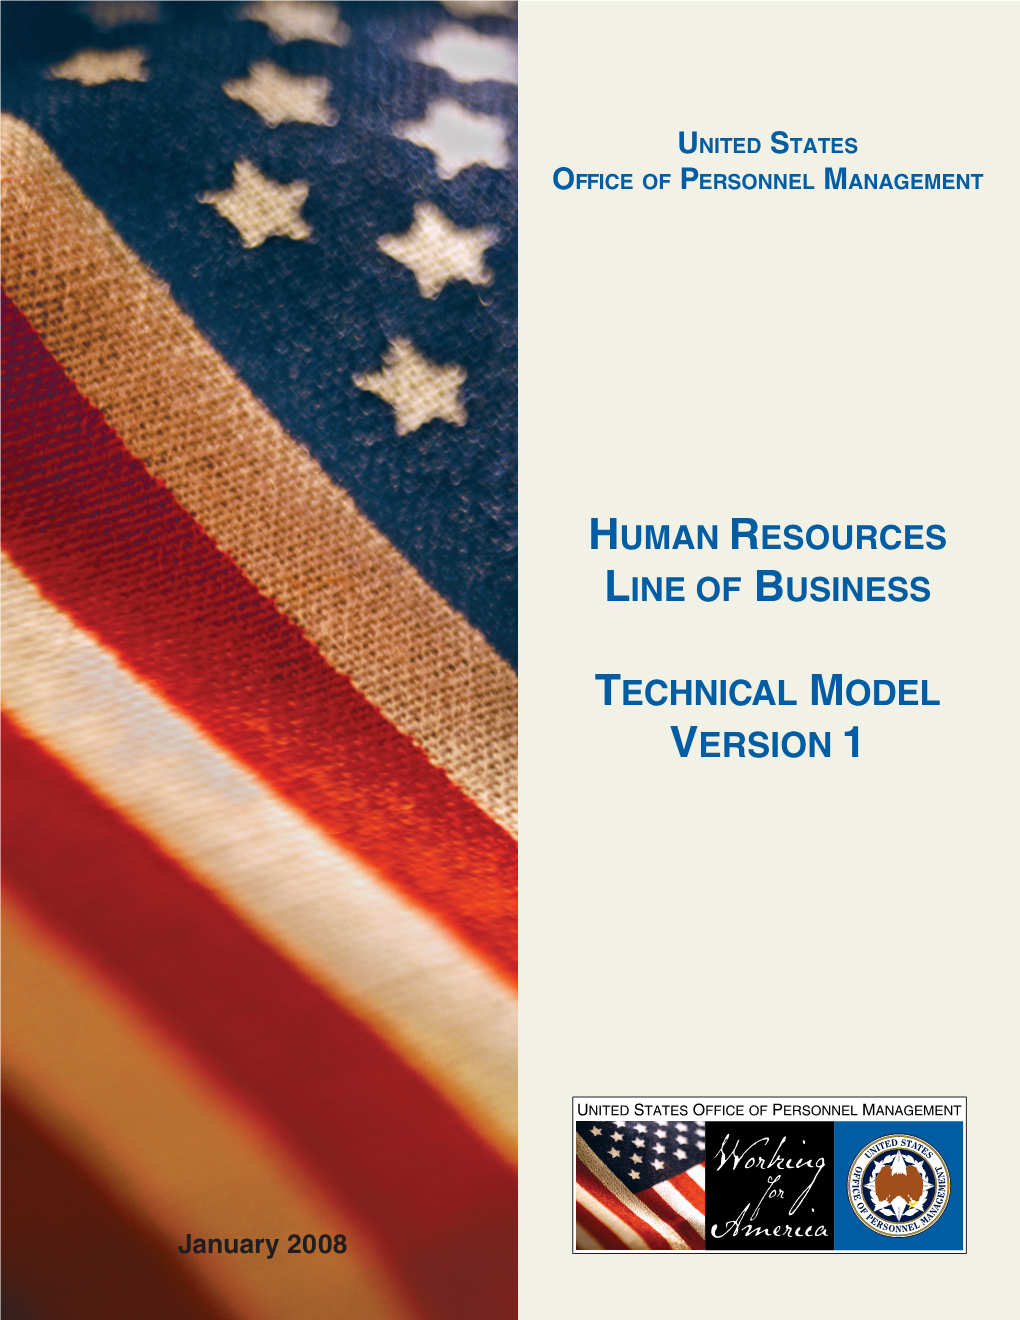 Human Resources Line of Business Technical Model Version 1